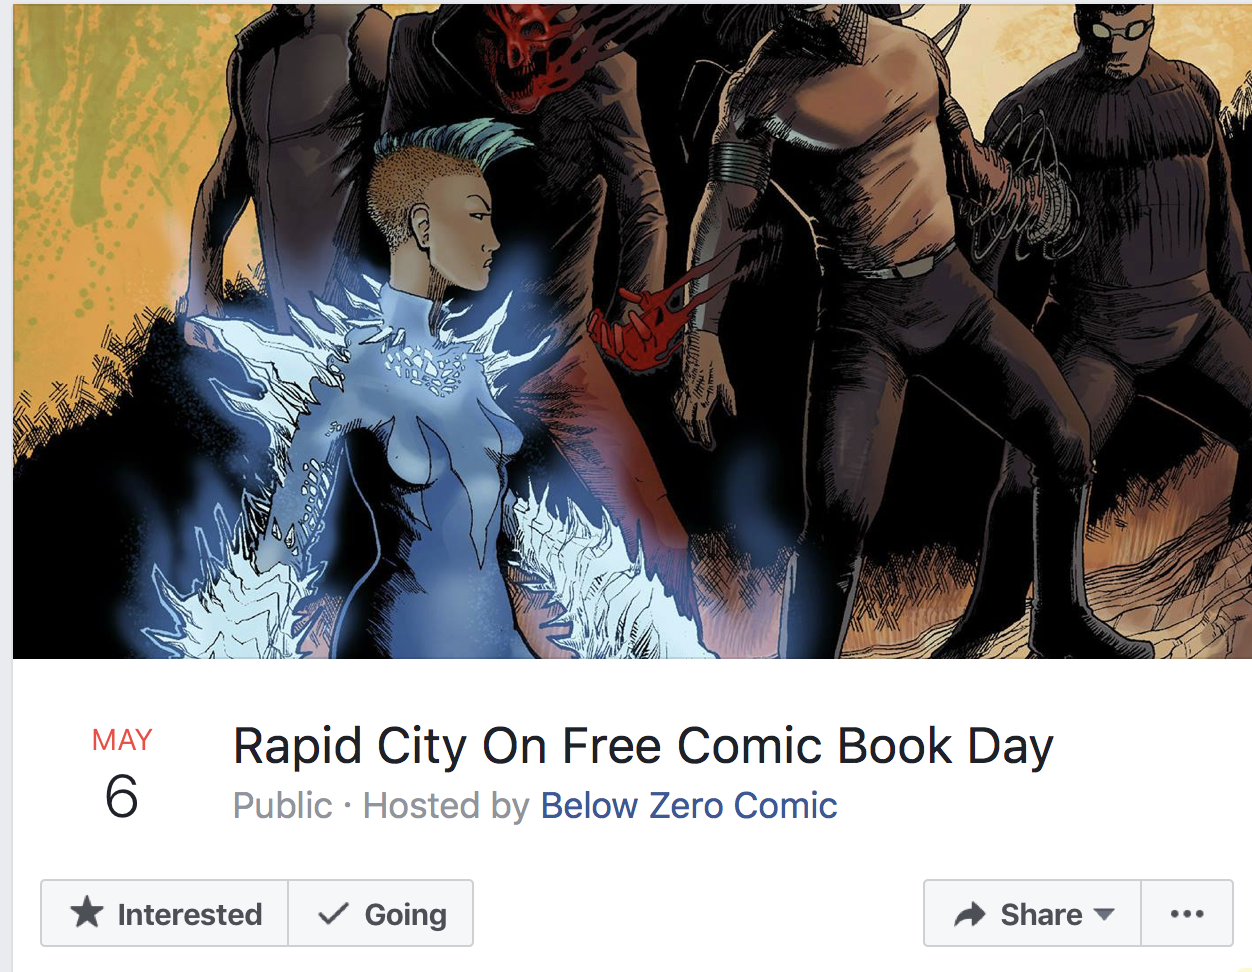 Josh Dahl will be In Somerville, MA for FREE Comic Book